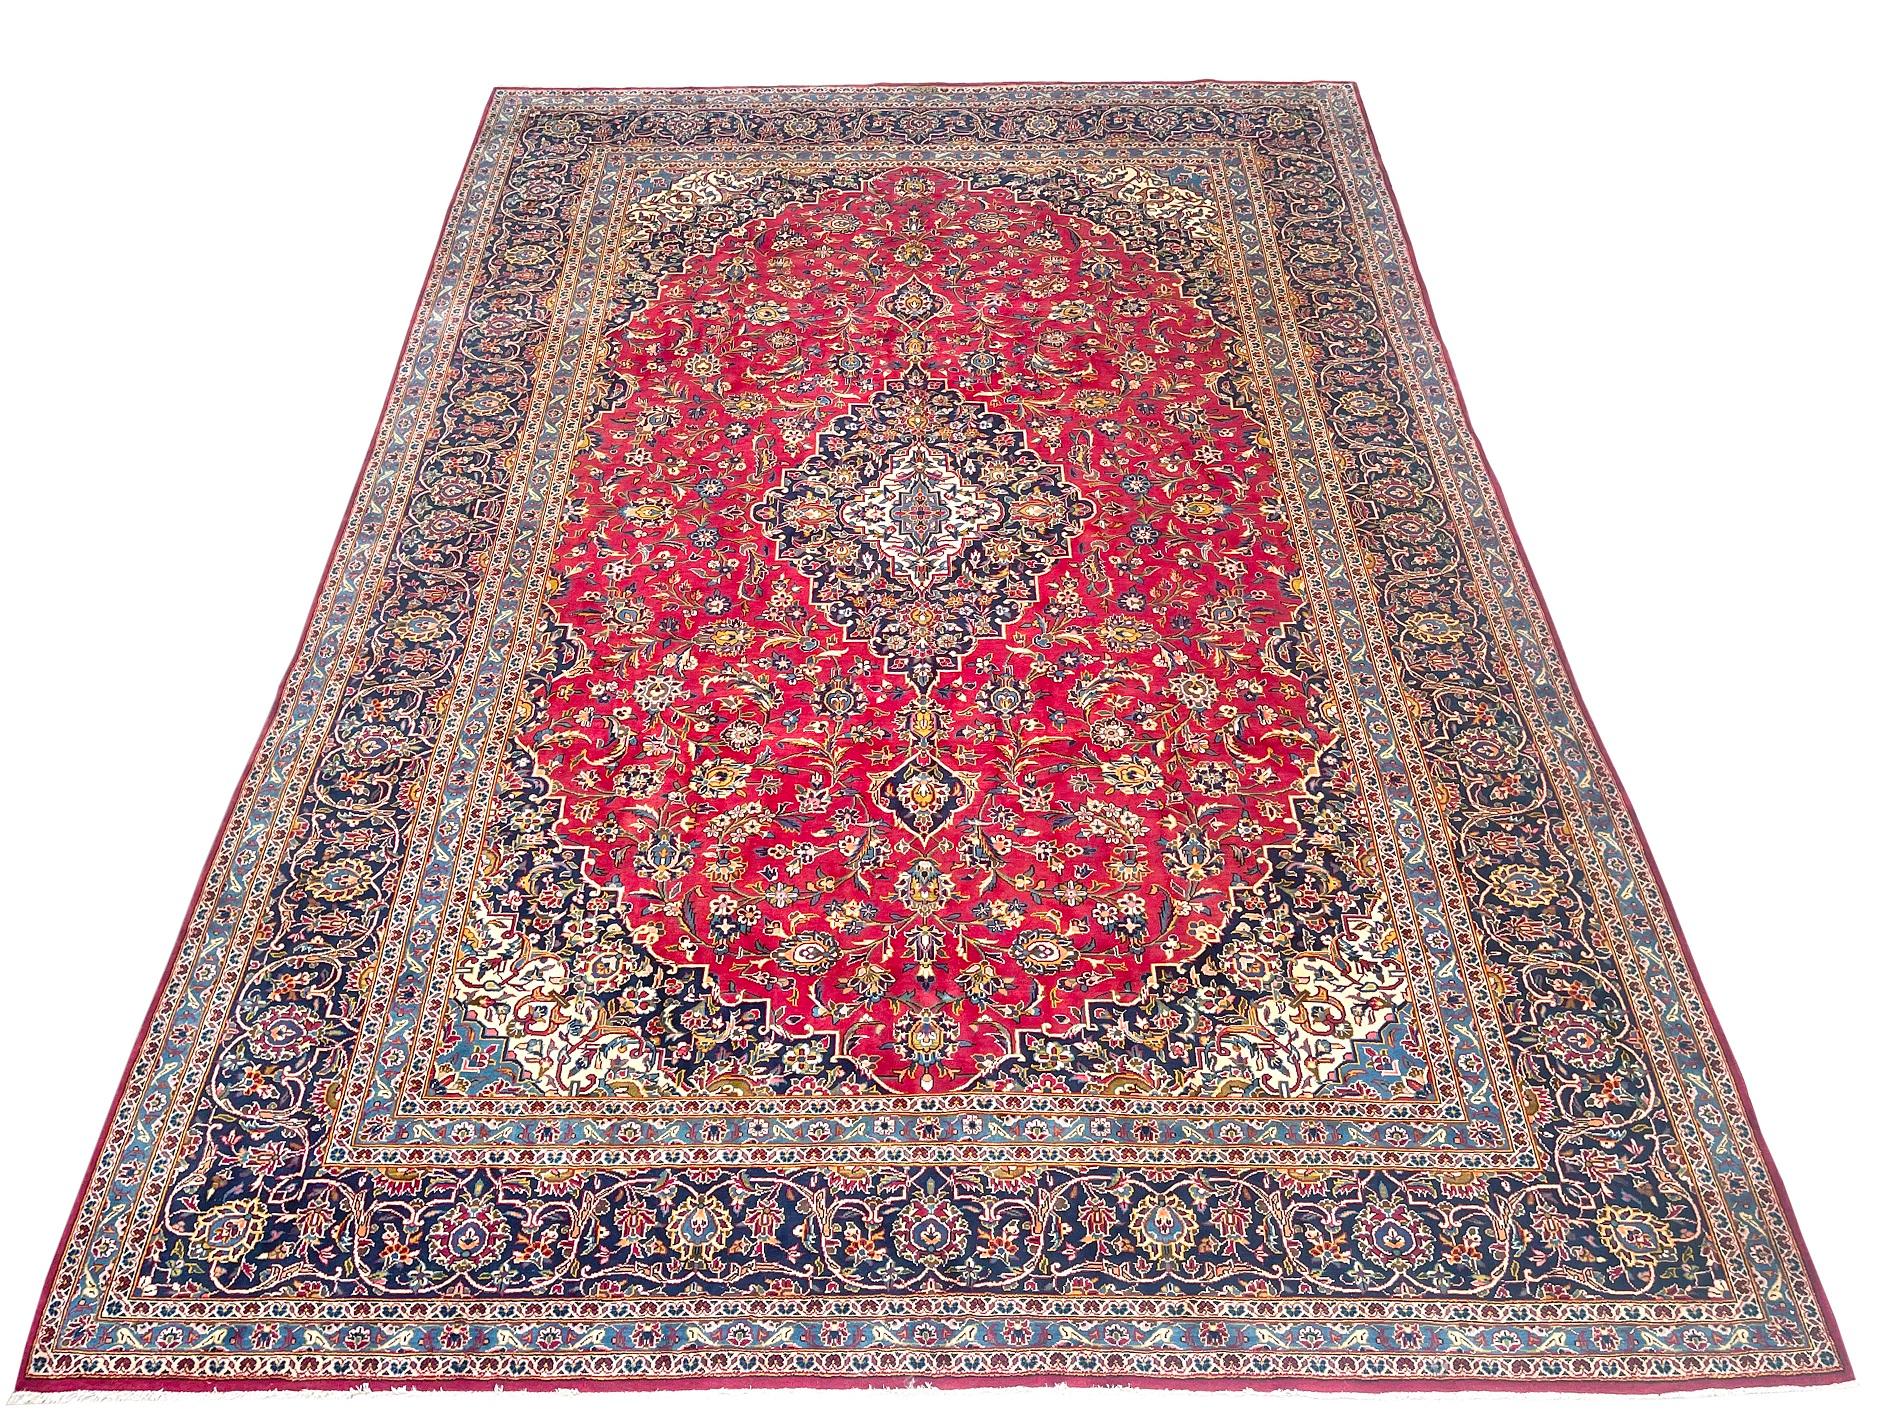 This handmade rug originally from Kashan which are one of the traditional classifications of Persian rugs. This piece has wool pile with cotton foundation. The design is medallion floral design with great tensile strength and resistance. The size of